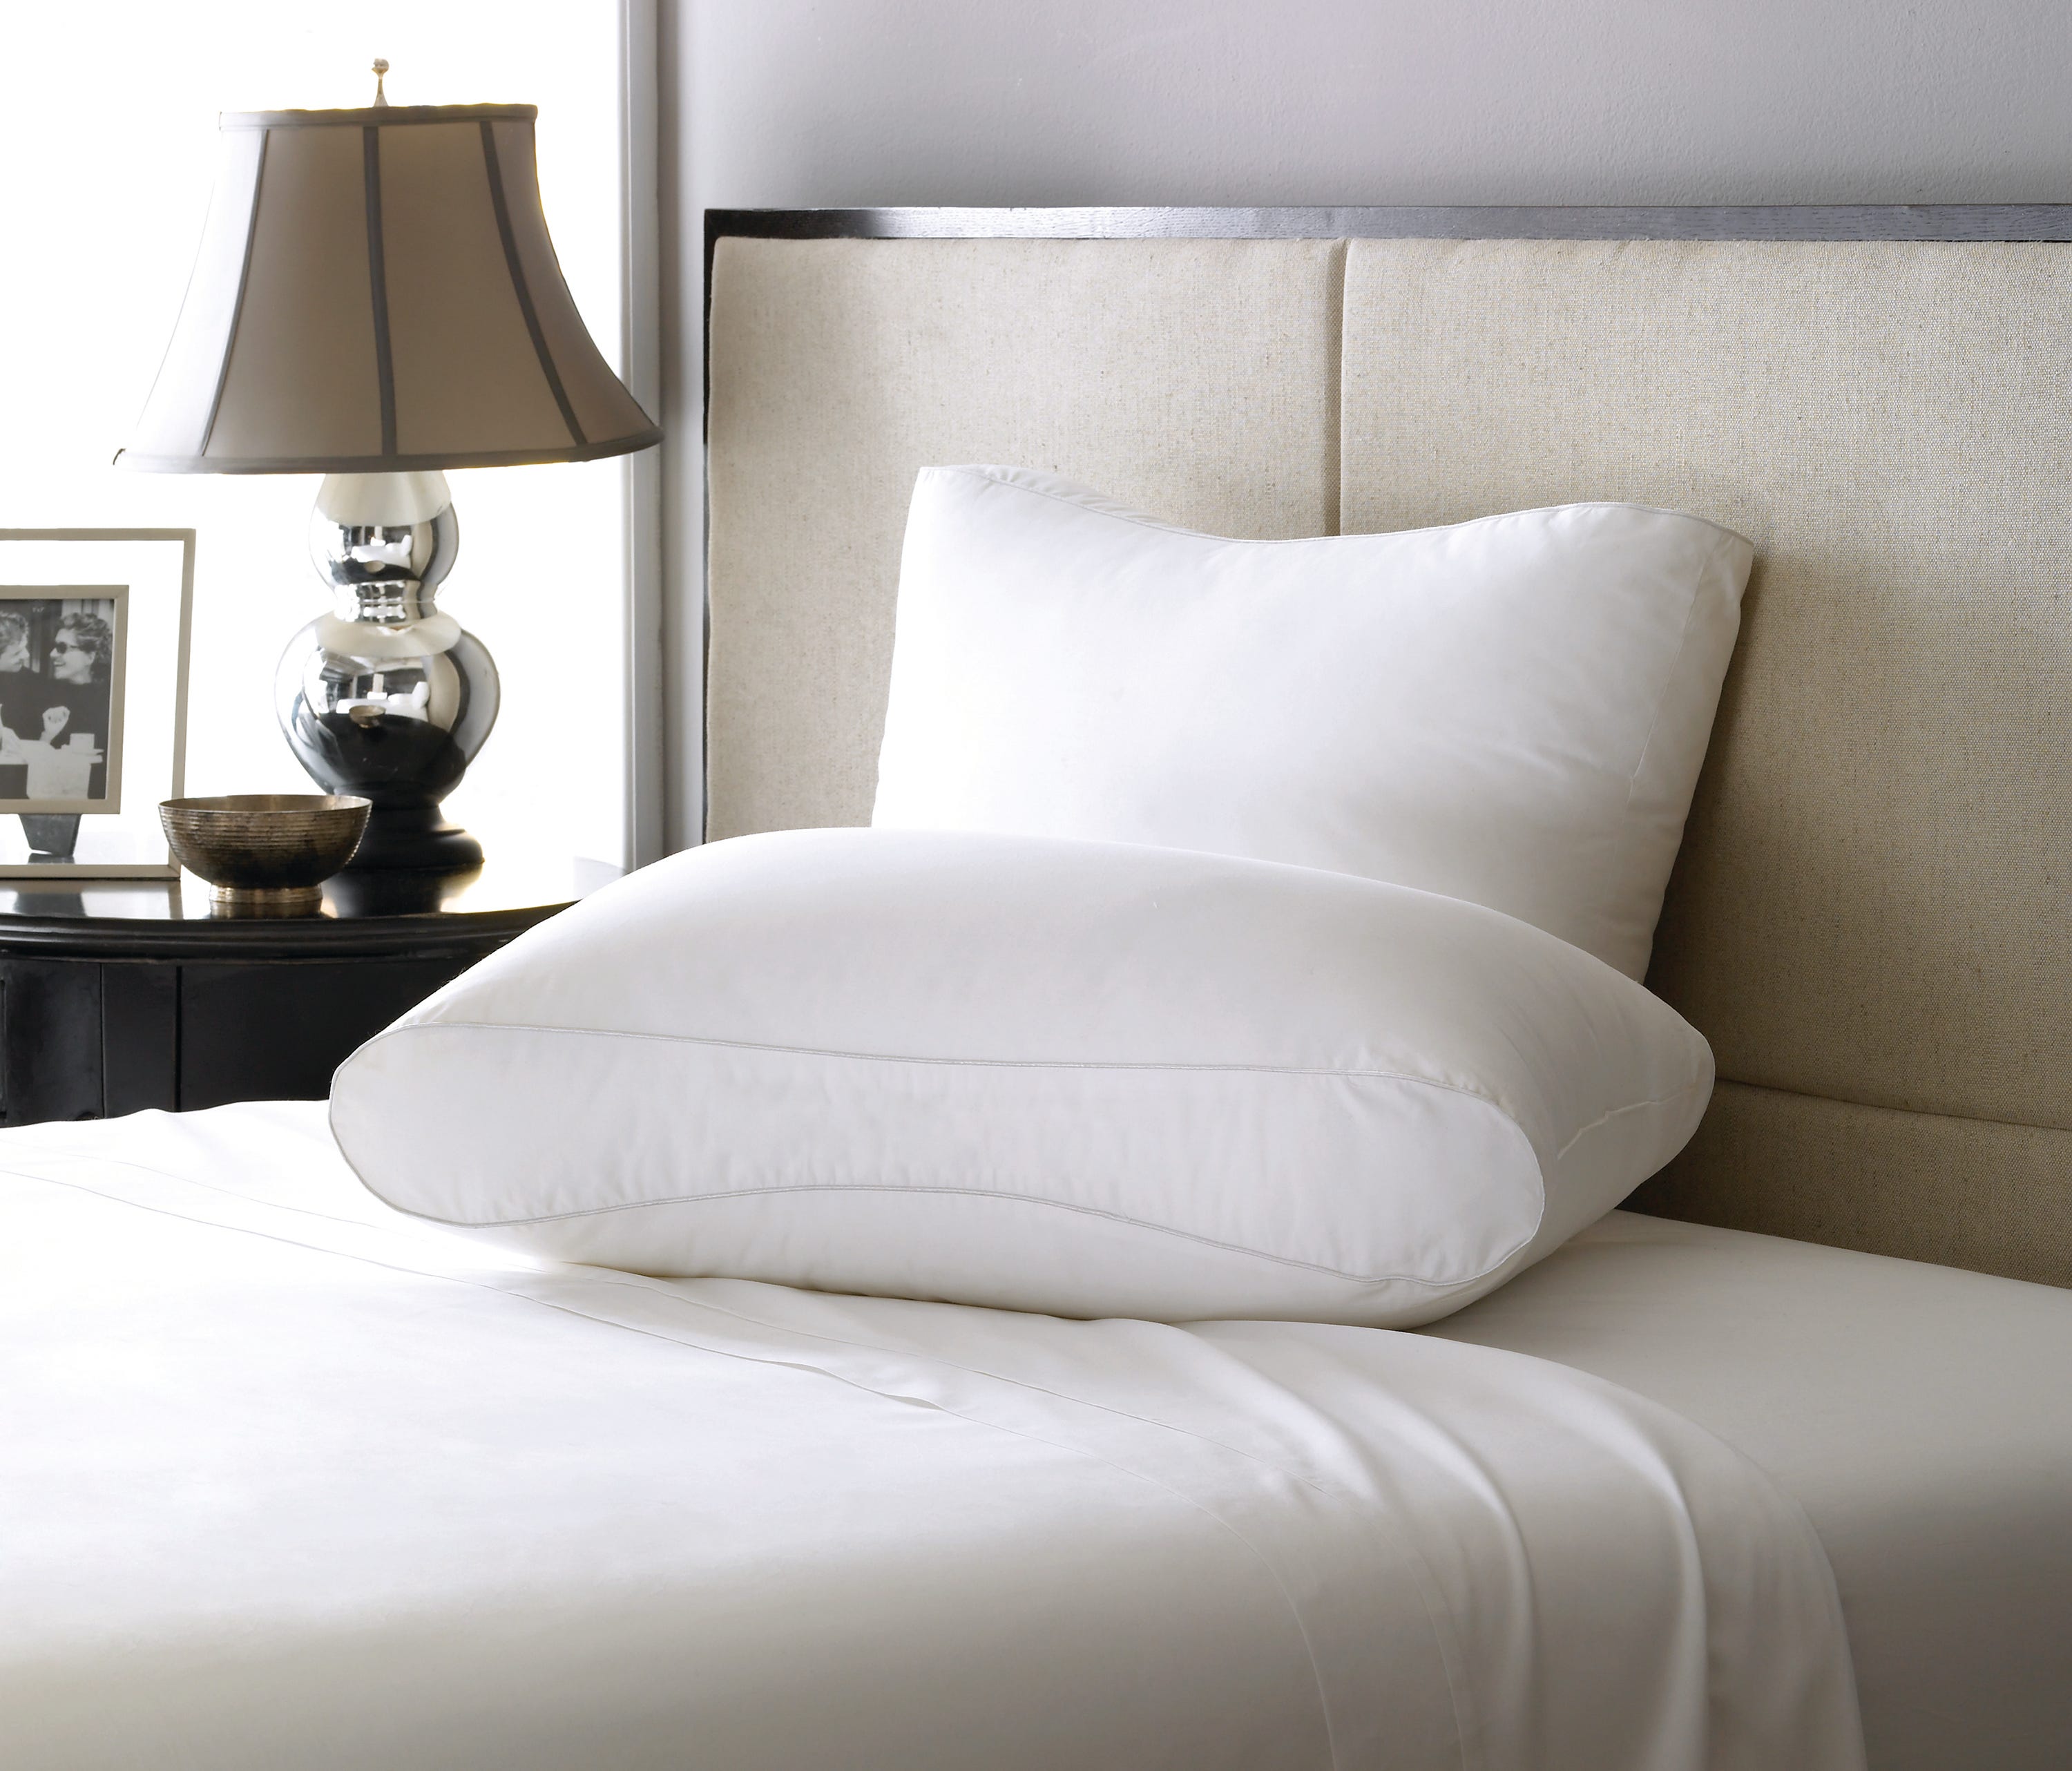 Crown Plaza is introducing new, high-quality pillows to its hotels.